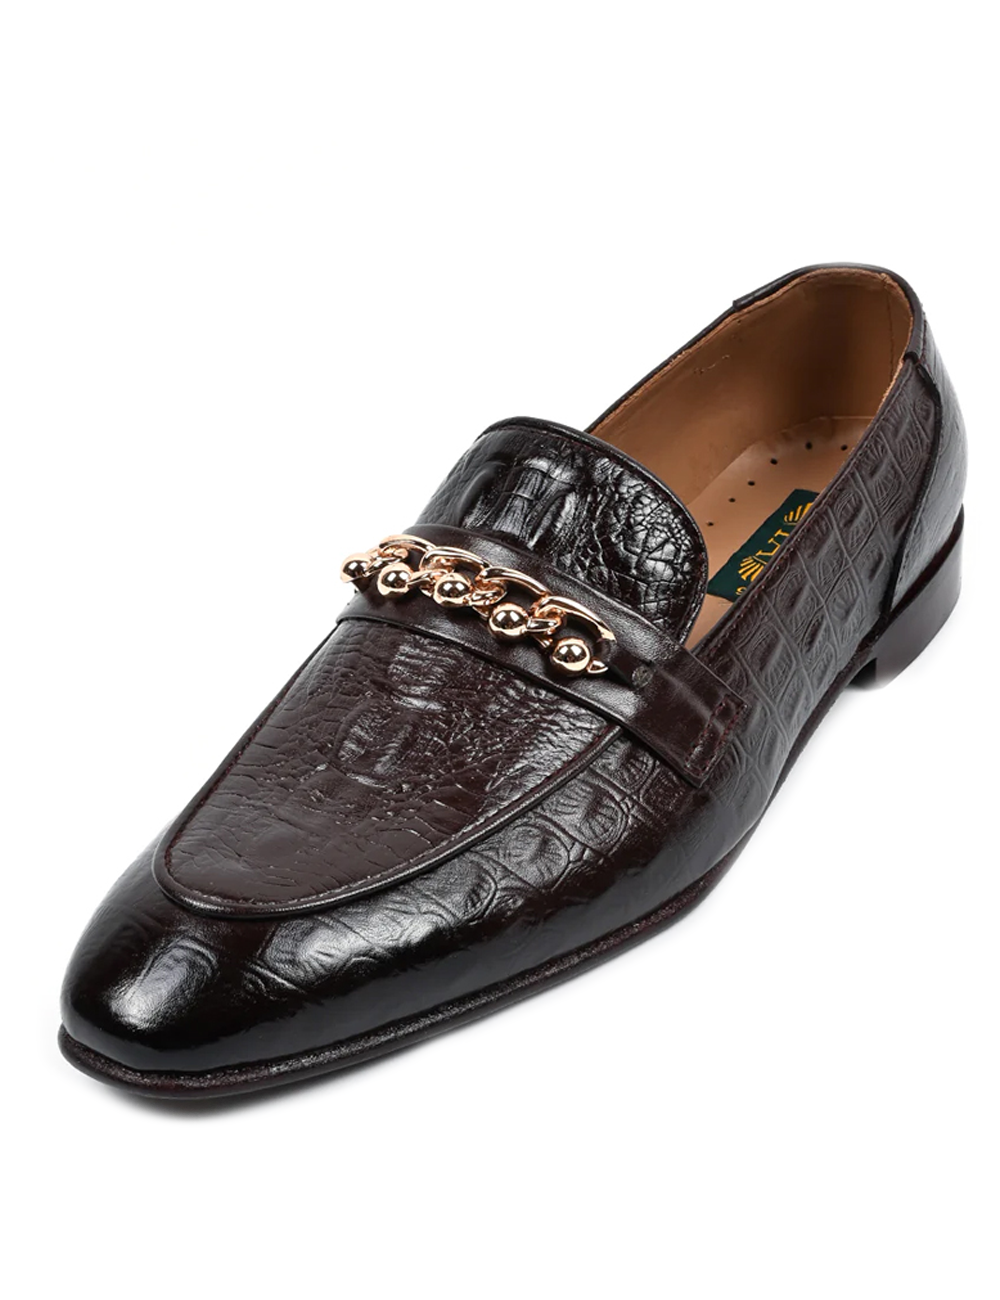 Formal Leather Chain Moccasin Shoes